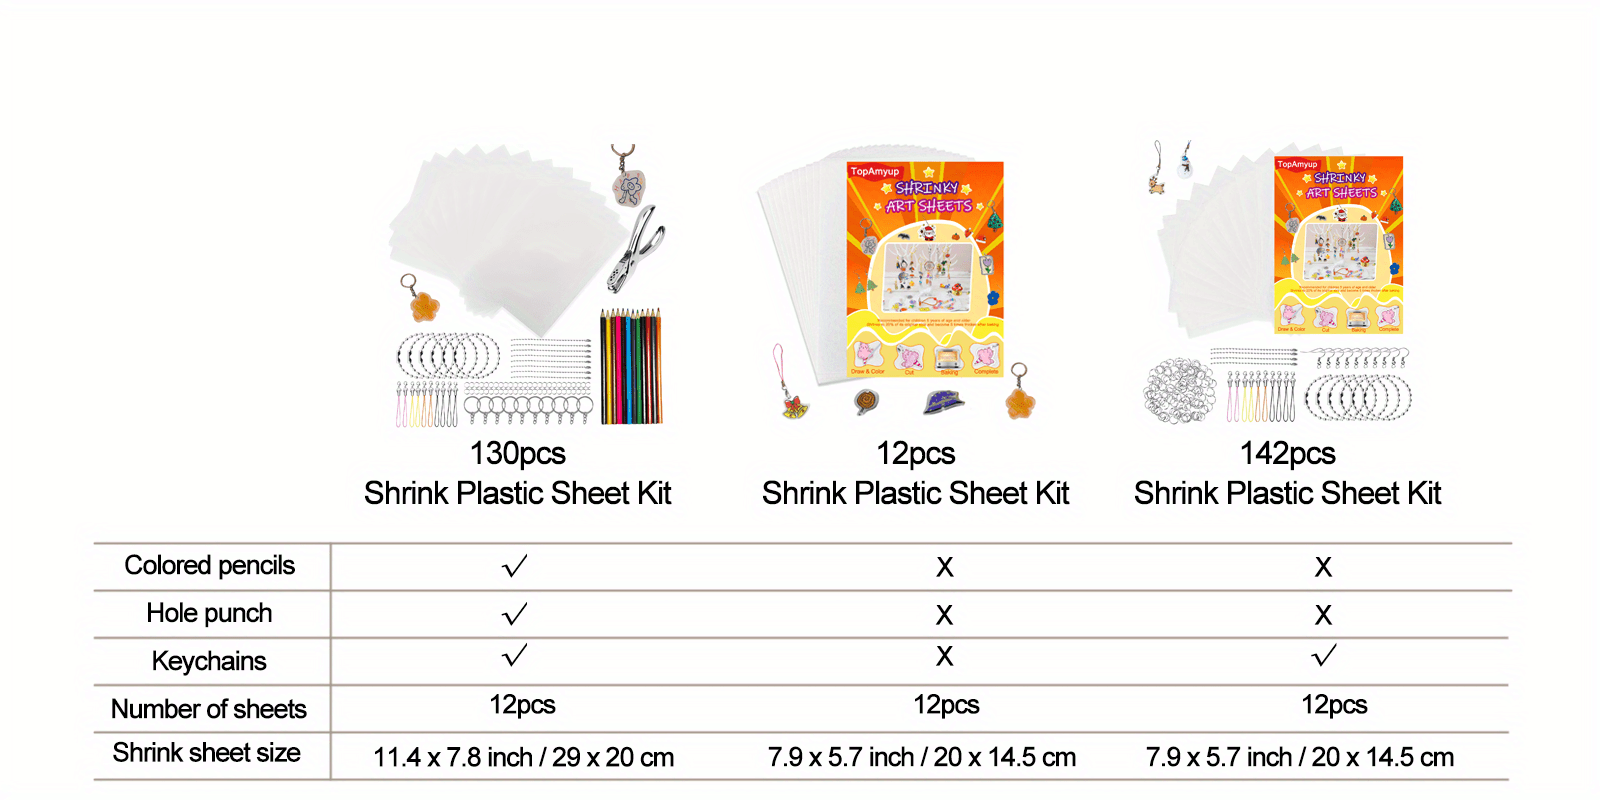 Mocoosy 148 Pcs Heat Shrink Plastic Sheets for Shrinky Dink Kits for Kids,  Shrinky Paper Art Films Clear Sanded Shrink Sheets Include Blank Shrink  Papers with Keychain Accessories for Creative Craft 